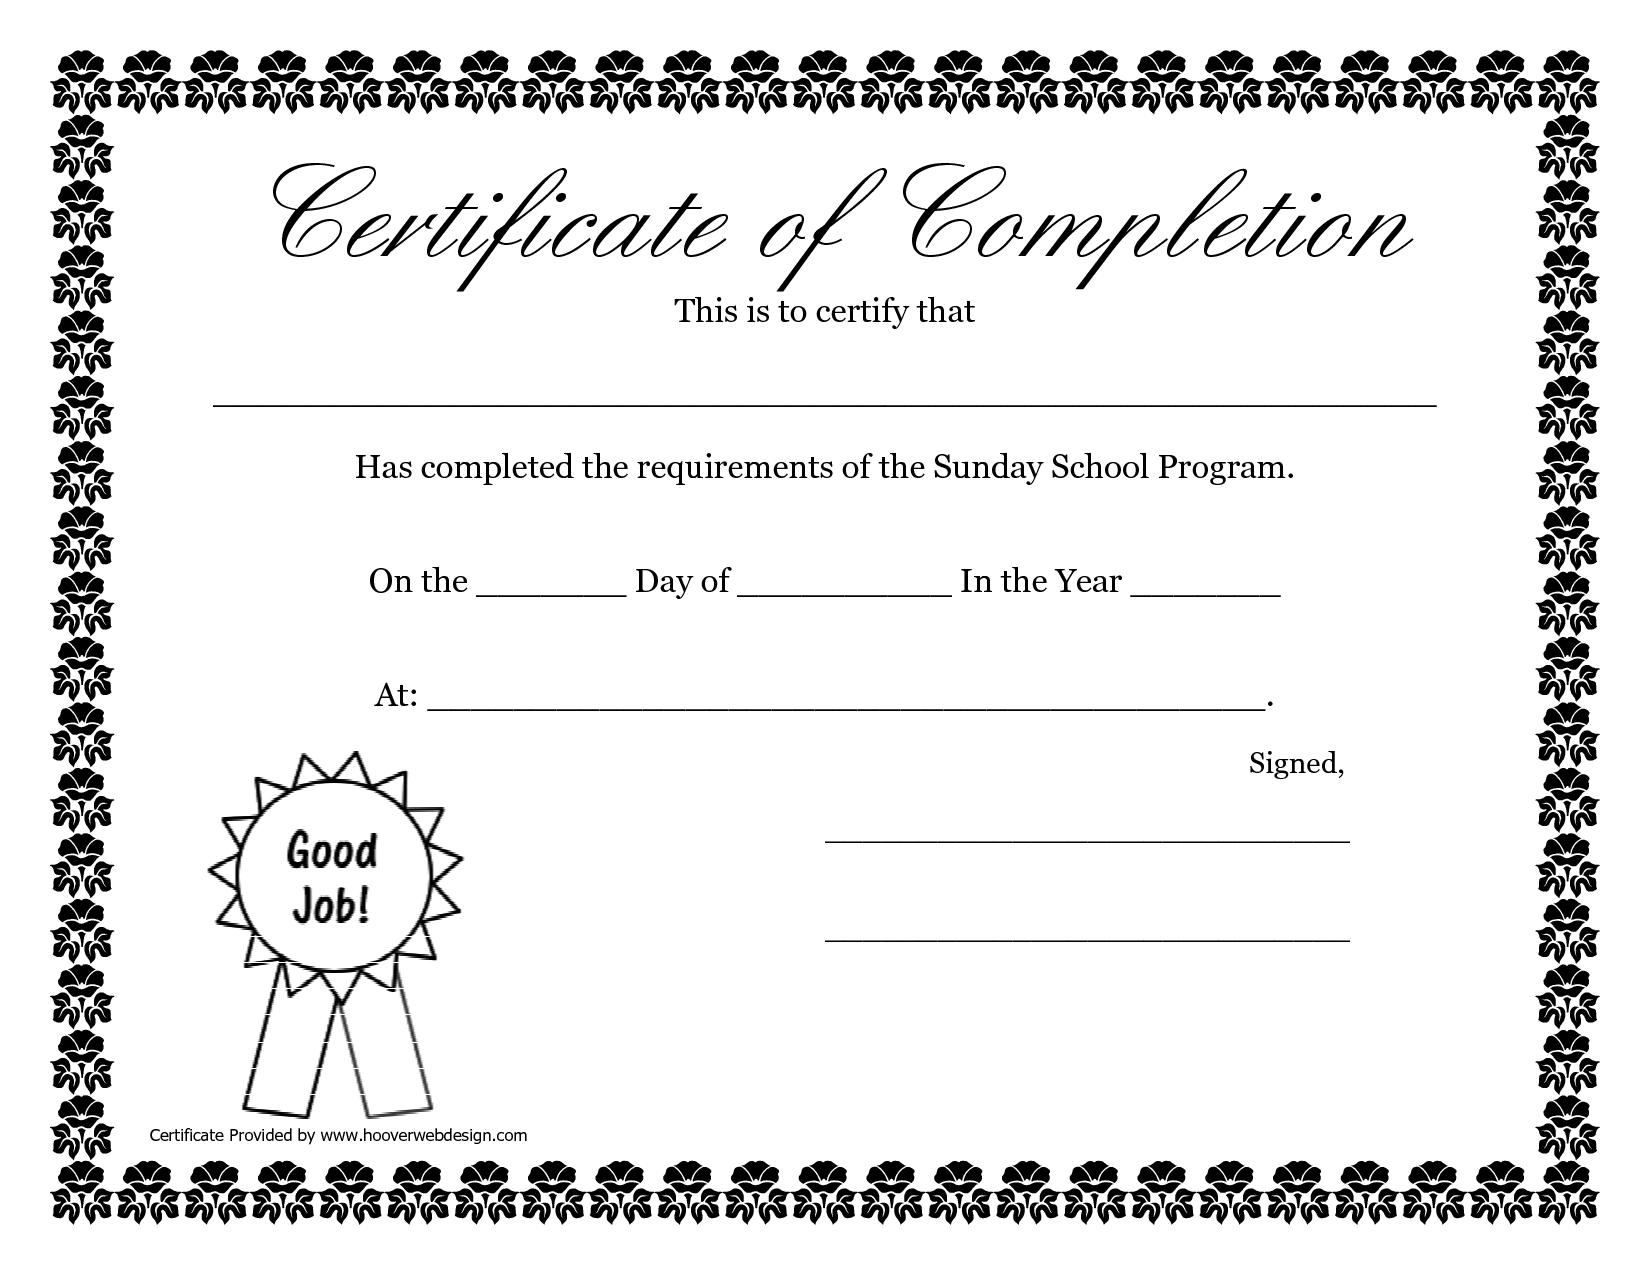 Pdf Free Certificate Templates Throughout Service Dog Certificate Template